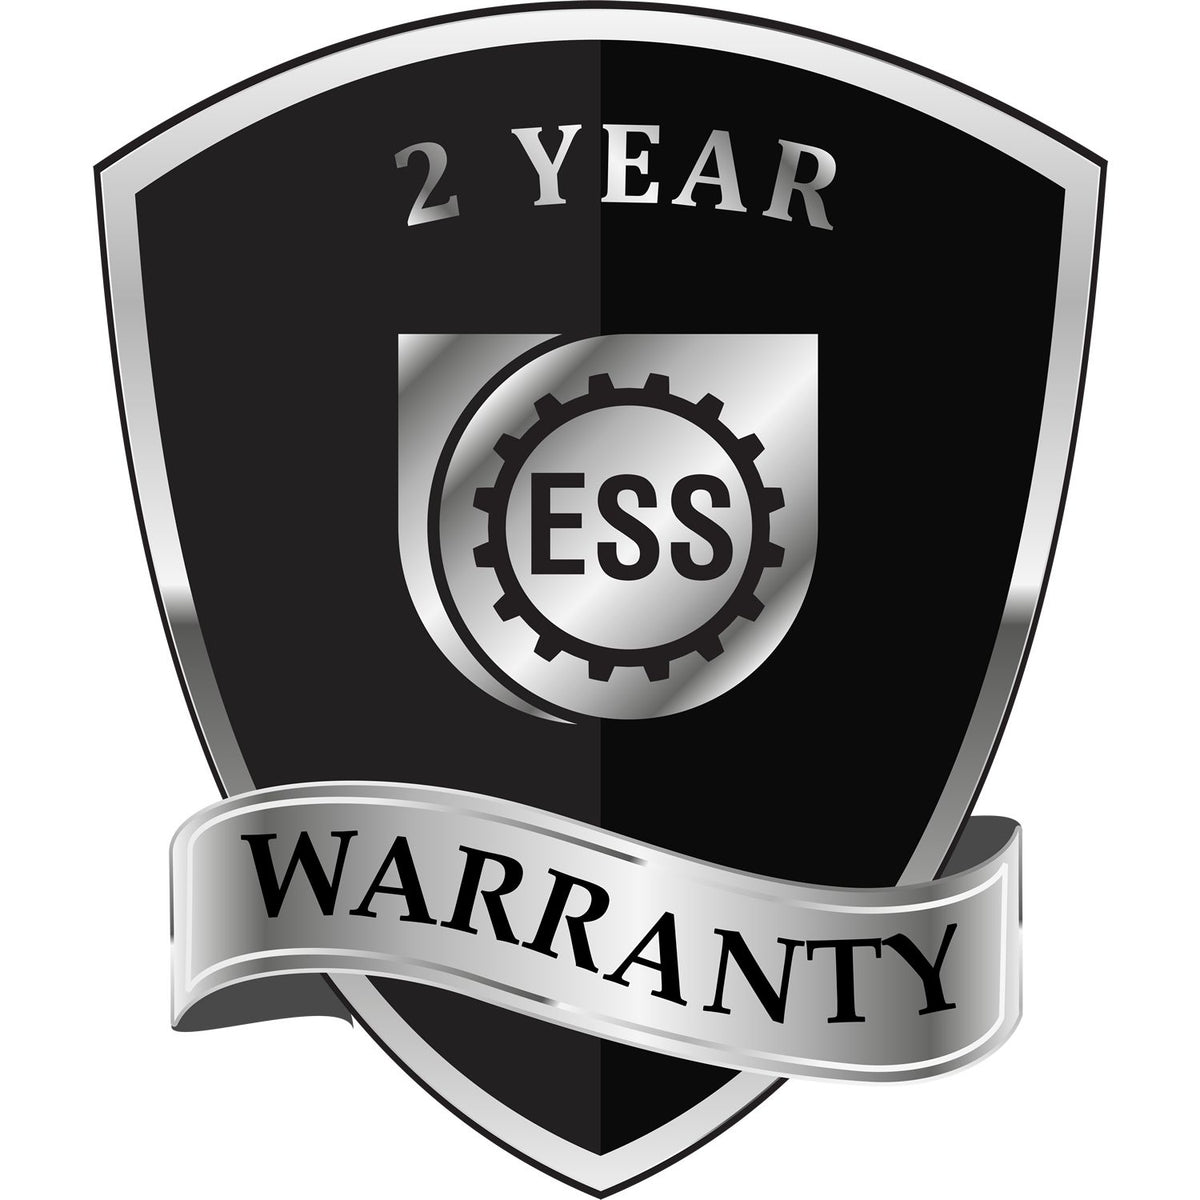 A black and silver badge or emblem showing warranty information for the Hybrid Kentucky Engineer Seal